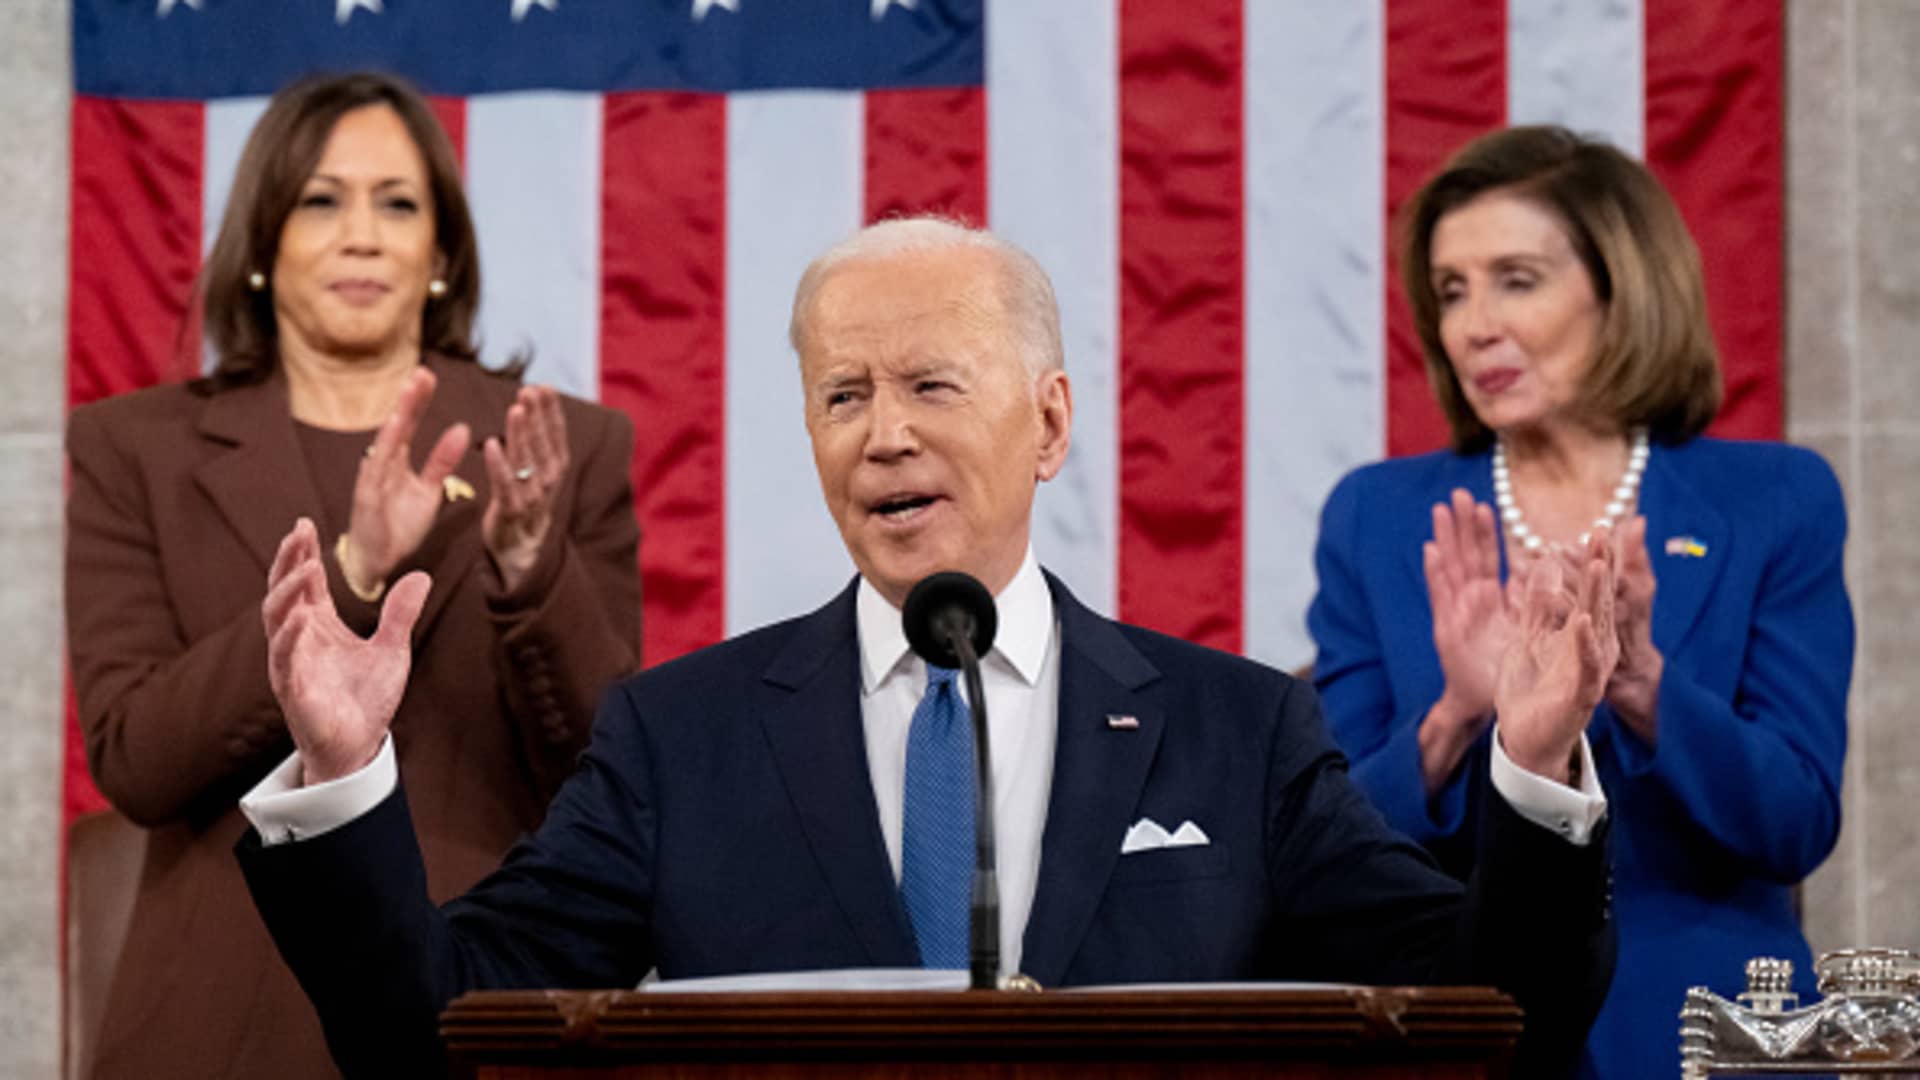 U.S. President Joe Biden speaks during a State of the Union address at the U.S. Capitol in Washington, D.C., U.S., on Tuesday, March 1, 2022.